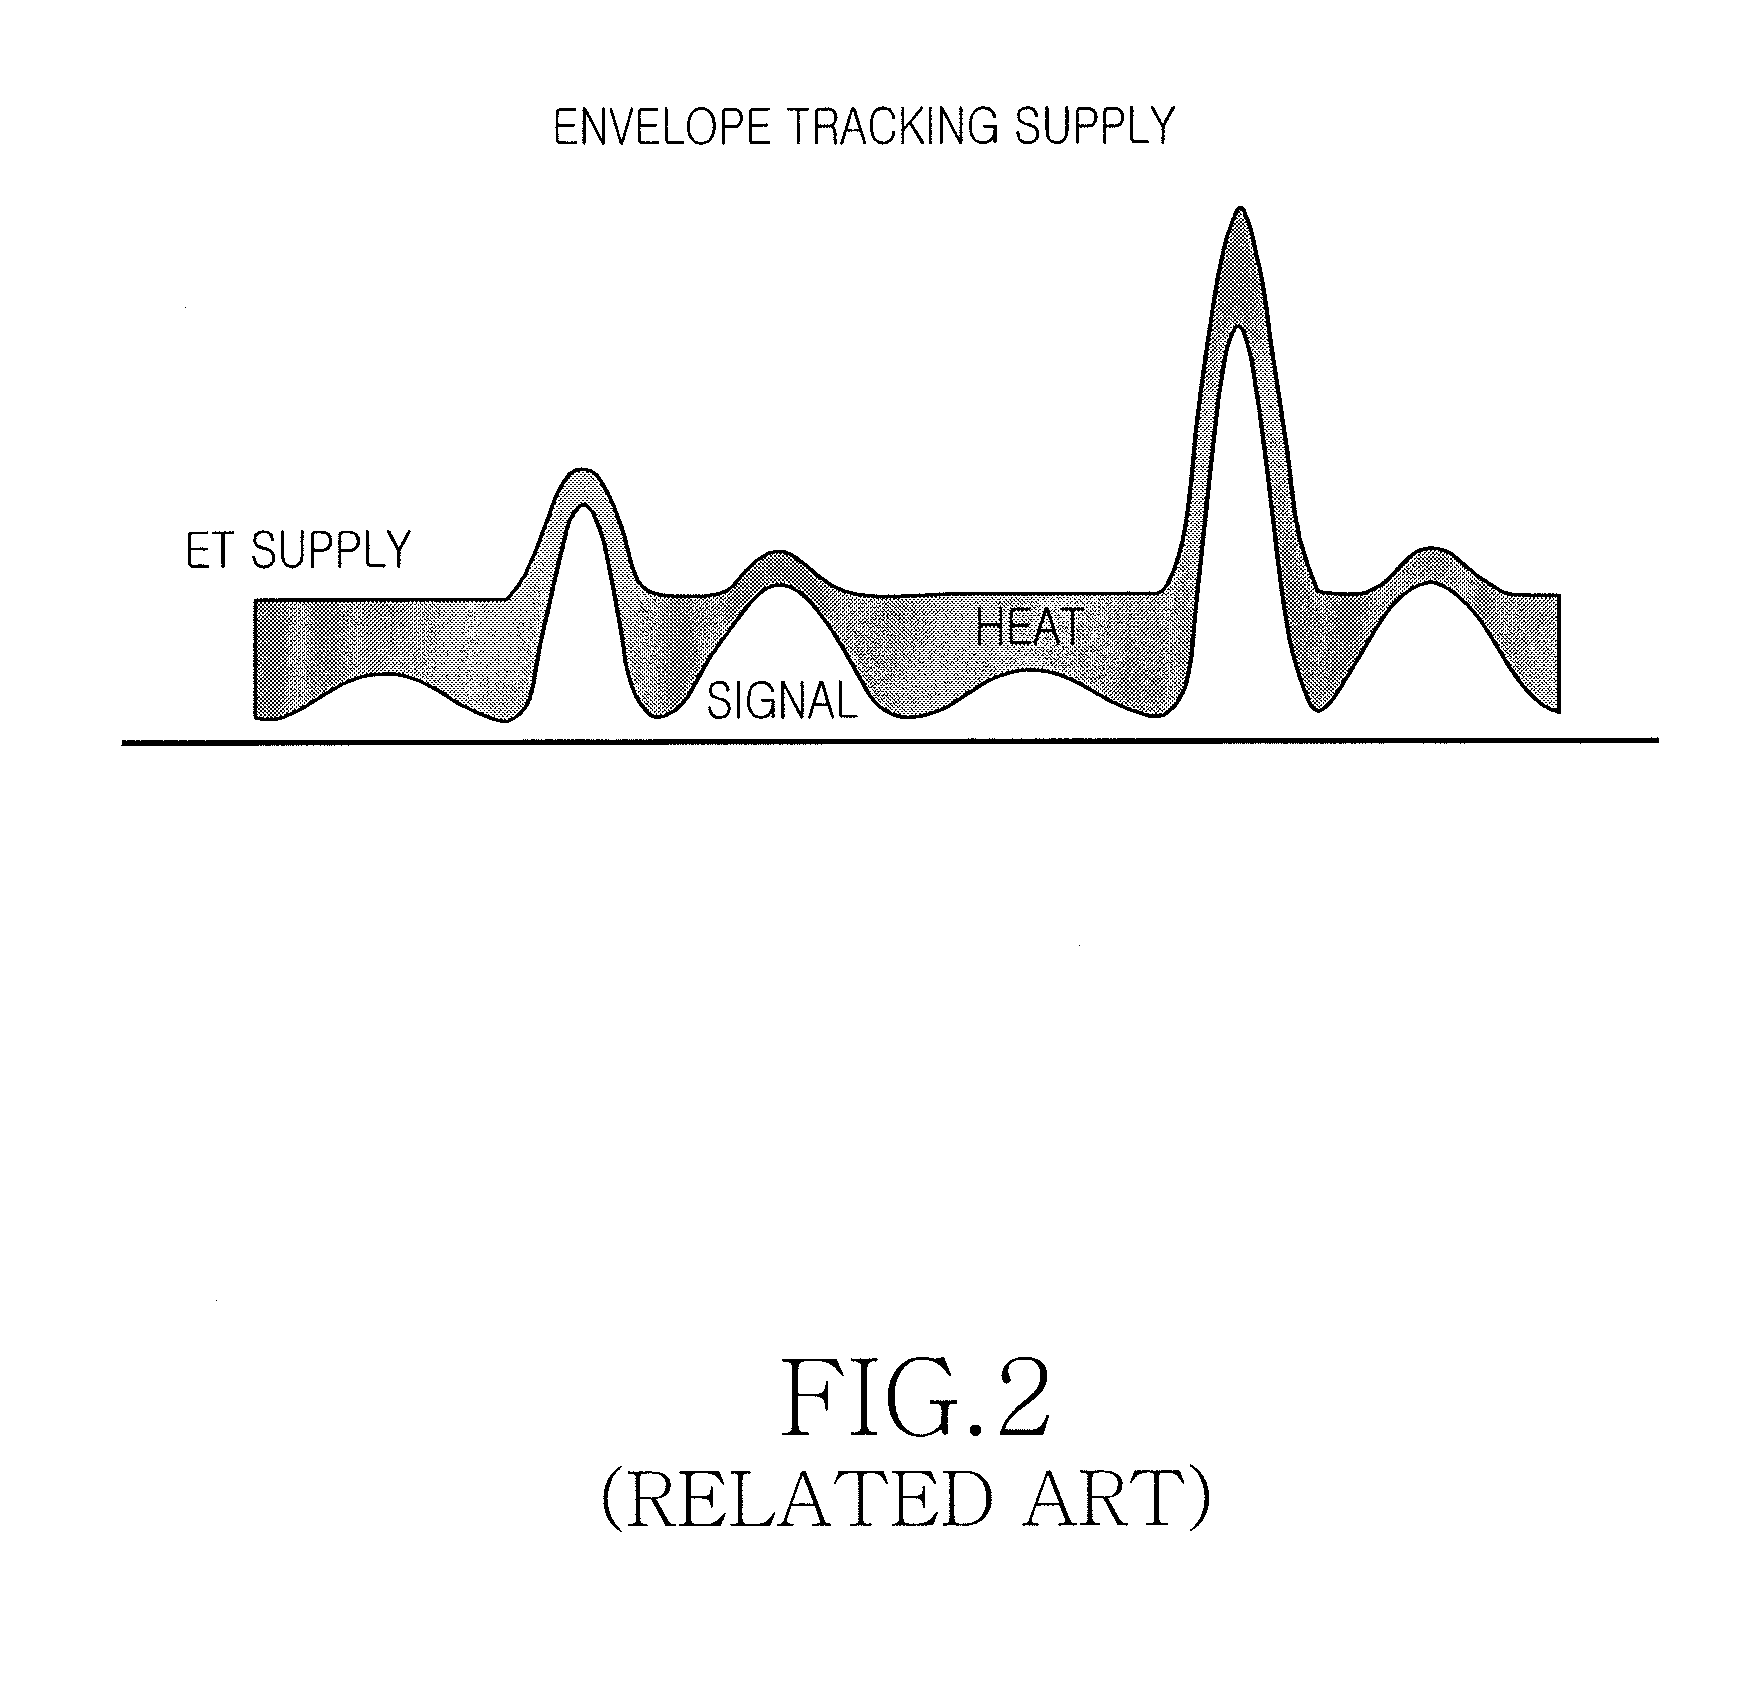 Apparatus and method for processing reduced bandwidth envelope tracking and digital pre-distortion